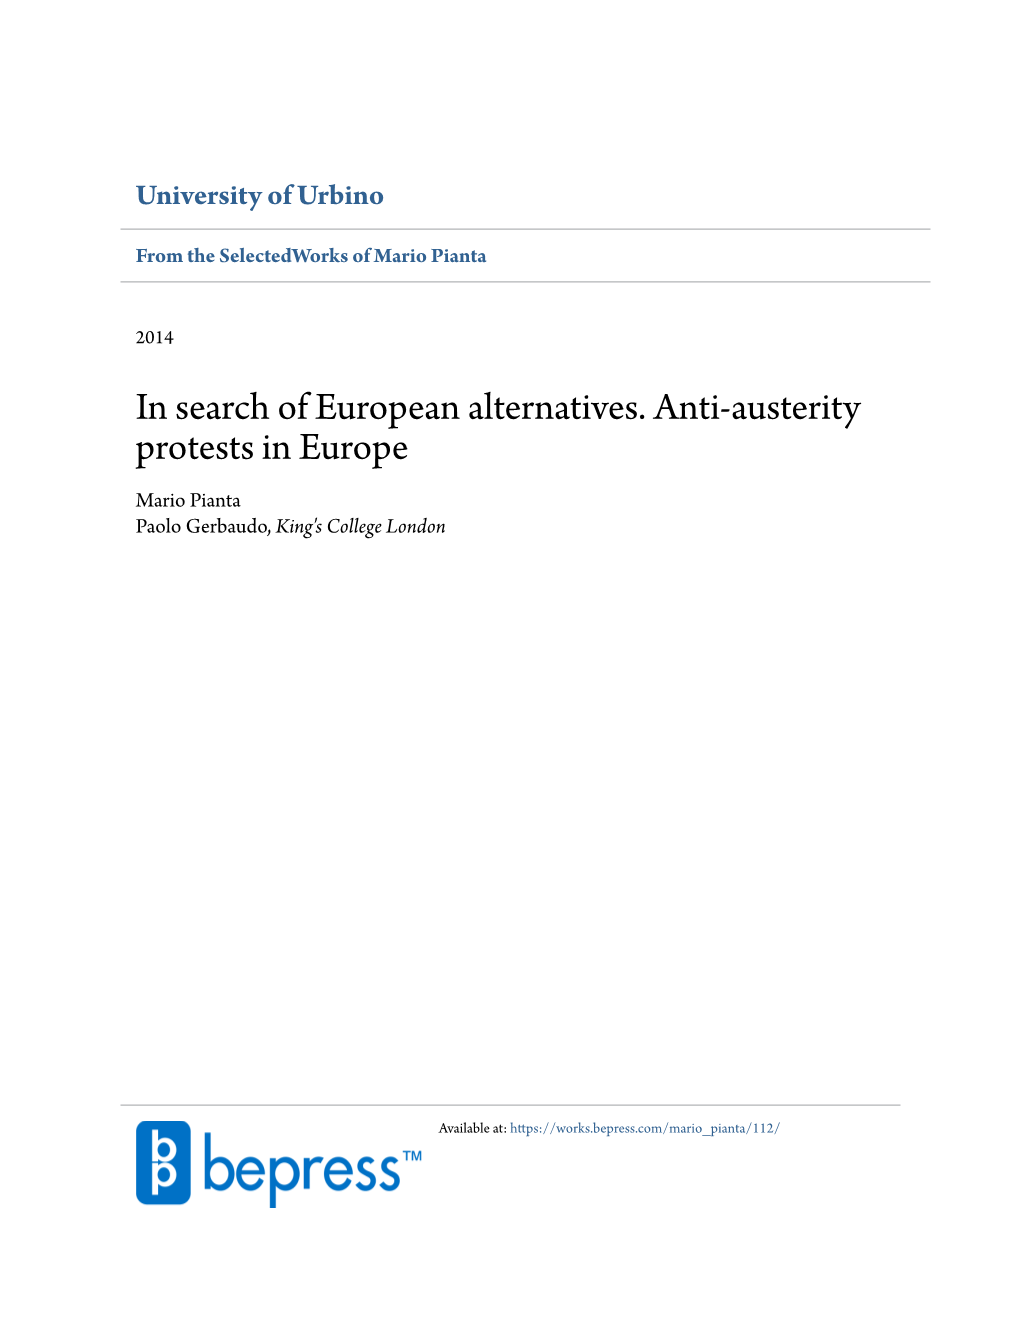 In Search of European Alternatives. Anti-Austerity Protests in Europe Mario Pianta Paolo Gerbaudo, King's College London